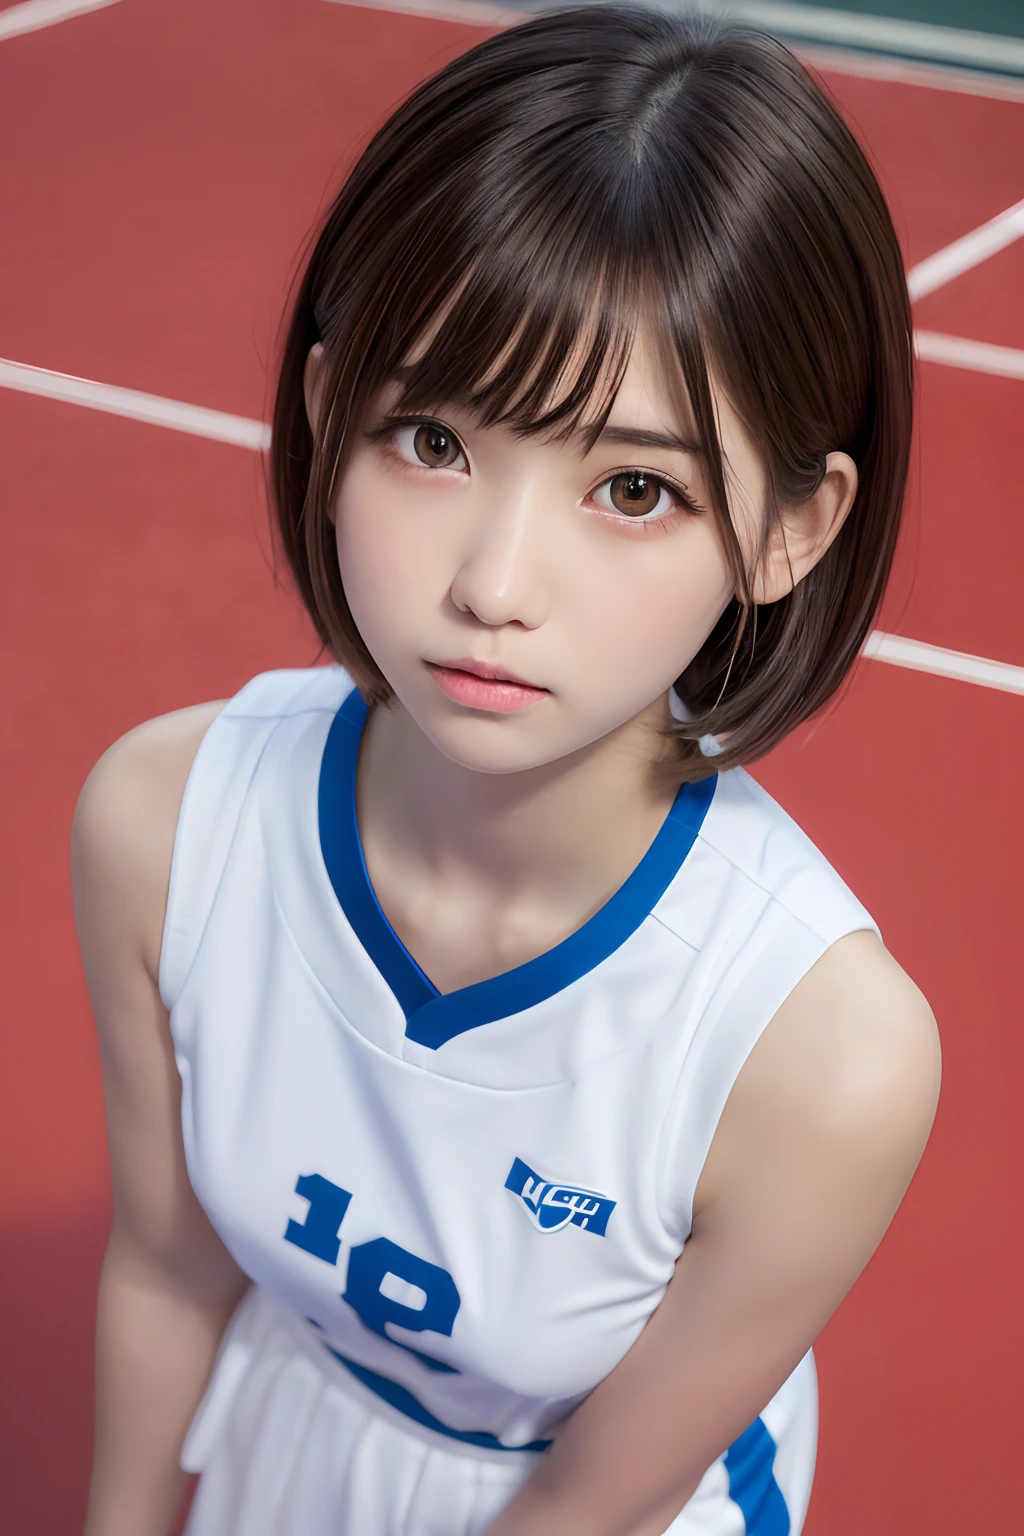 masutepiece, Best Quality, One girl, (a beauty Girl, kawaii:1.3), (15 years old:1.3), Very fine eye definition, (Symmetrical eyes:1.3), (basketball court), (white uniform:1.2), small breasts, Brown eyes, Parted bangs, Brown hair,  girl